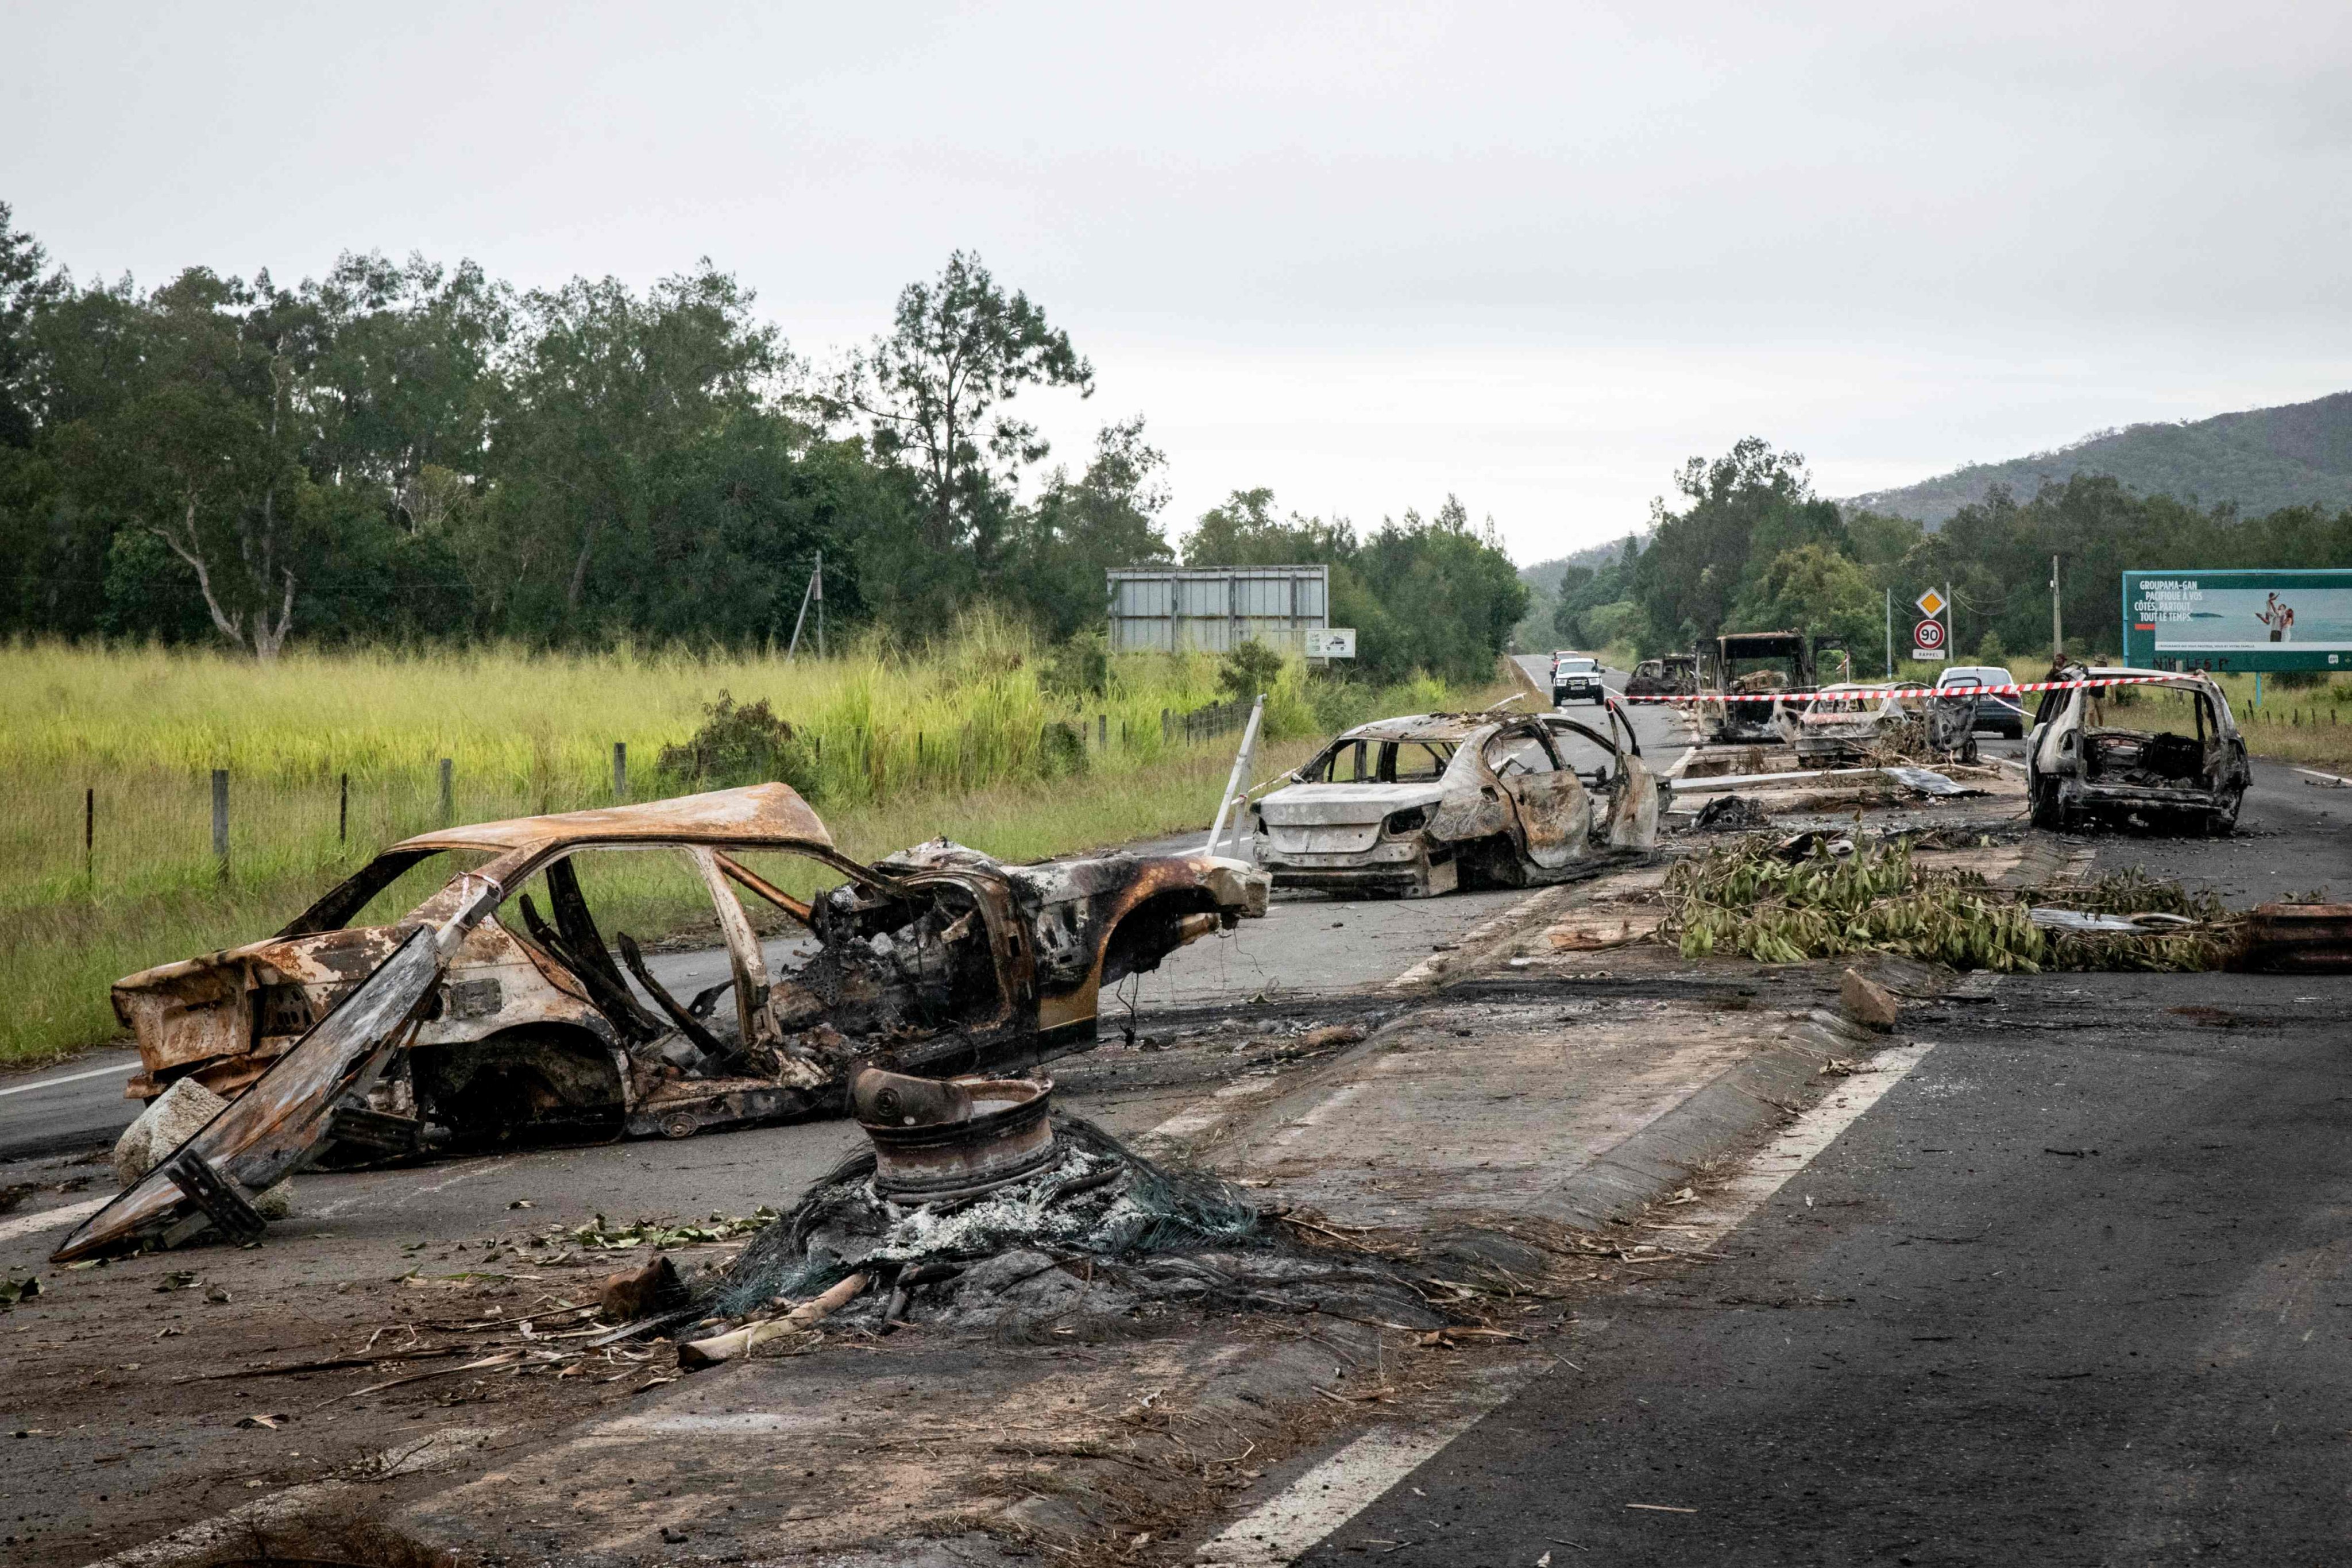 Burnt vehicles can be seen at a roadblock in the capital of the French Pacific territory of New Caledonia, which has been rocked by riots after France’s National Assembly approved contentious voting reforms to the territory that angered independence supporters. Photo: AFP/dpa